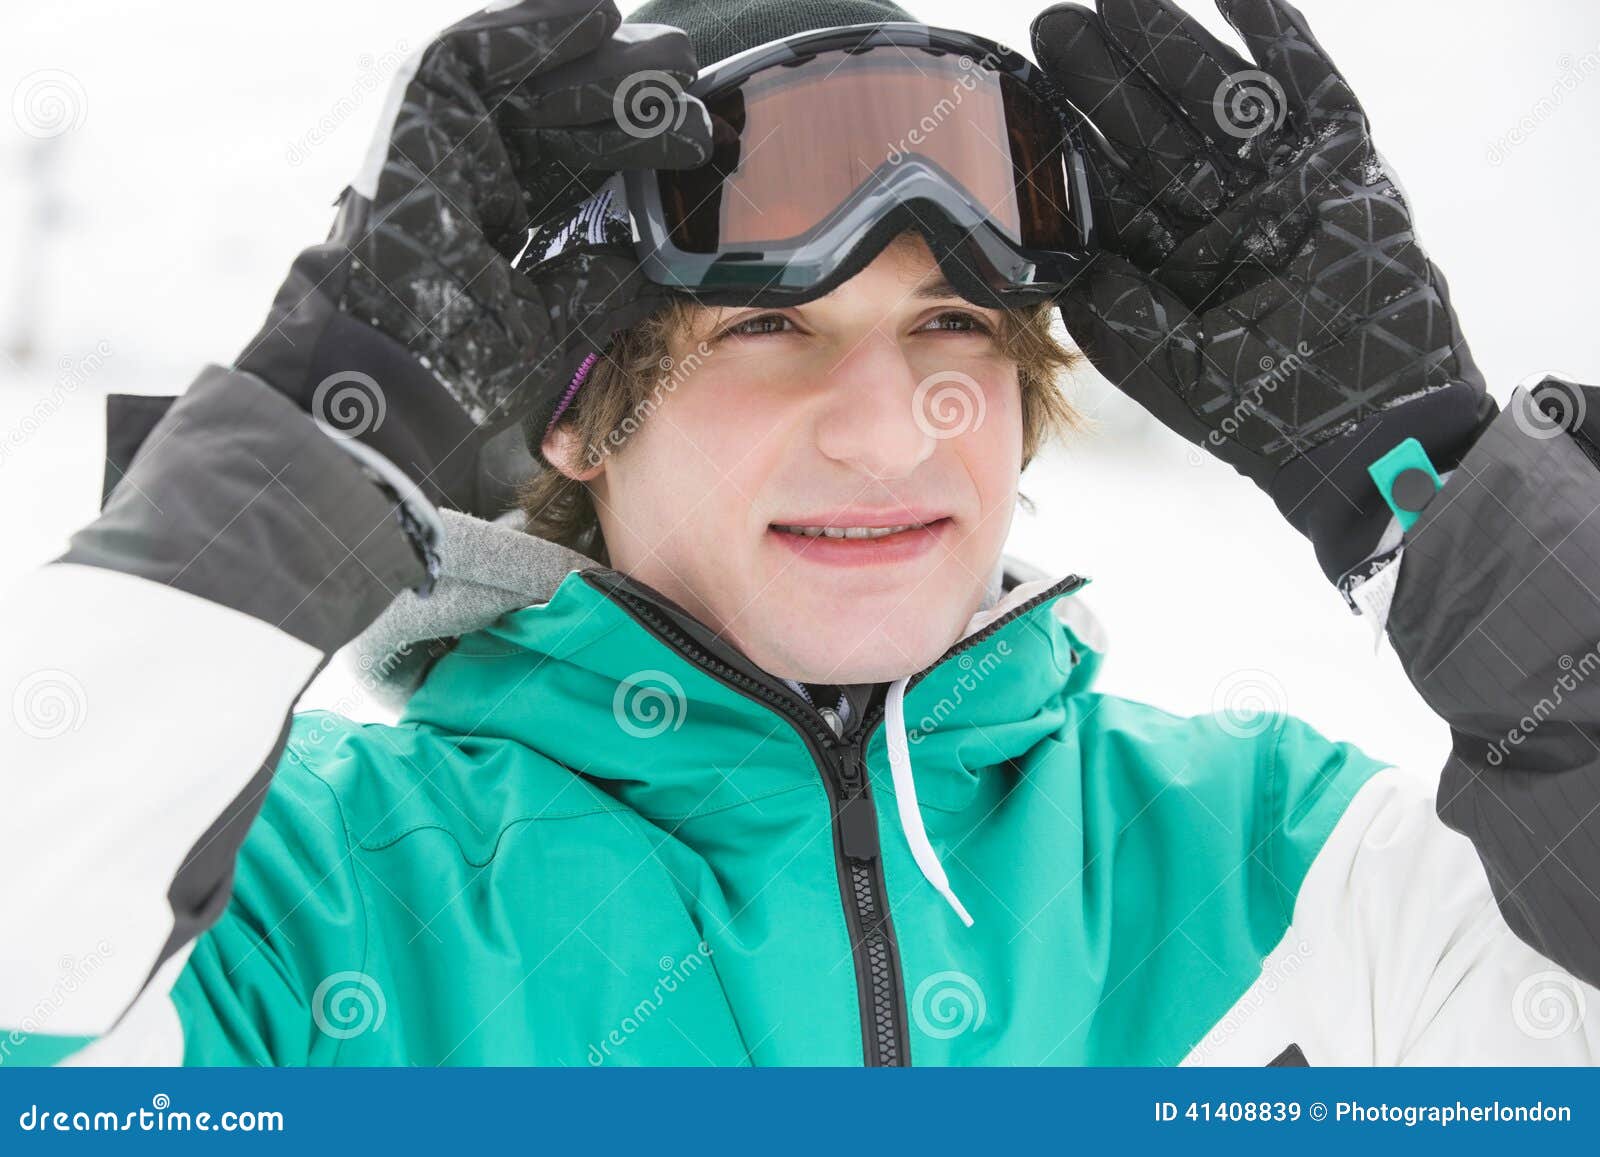 Handsome Young Man Wearing Ski Goggles Outdoors Stock Image - Image of ...